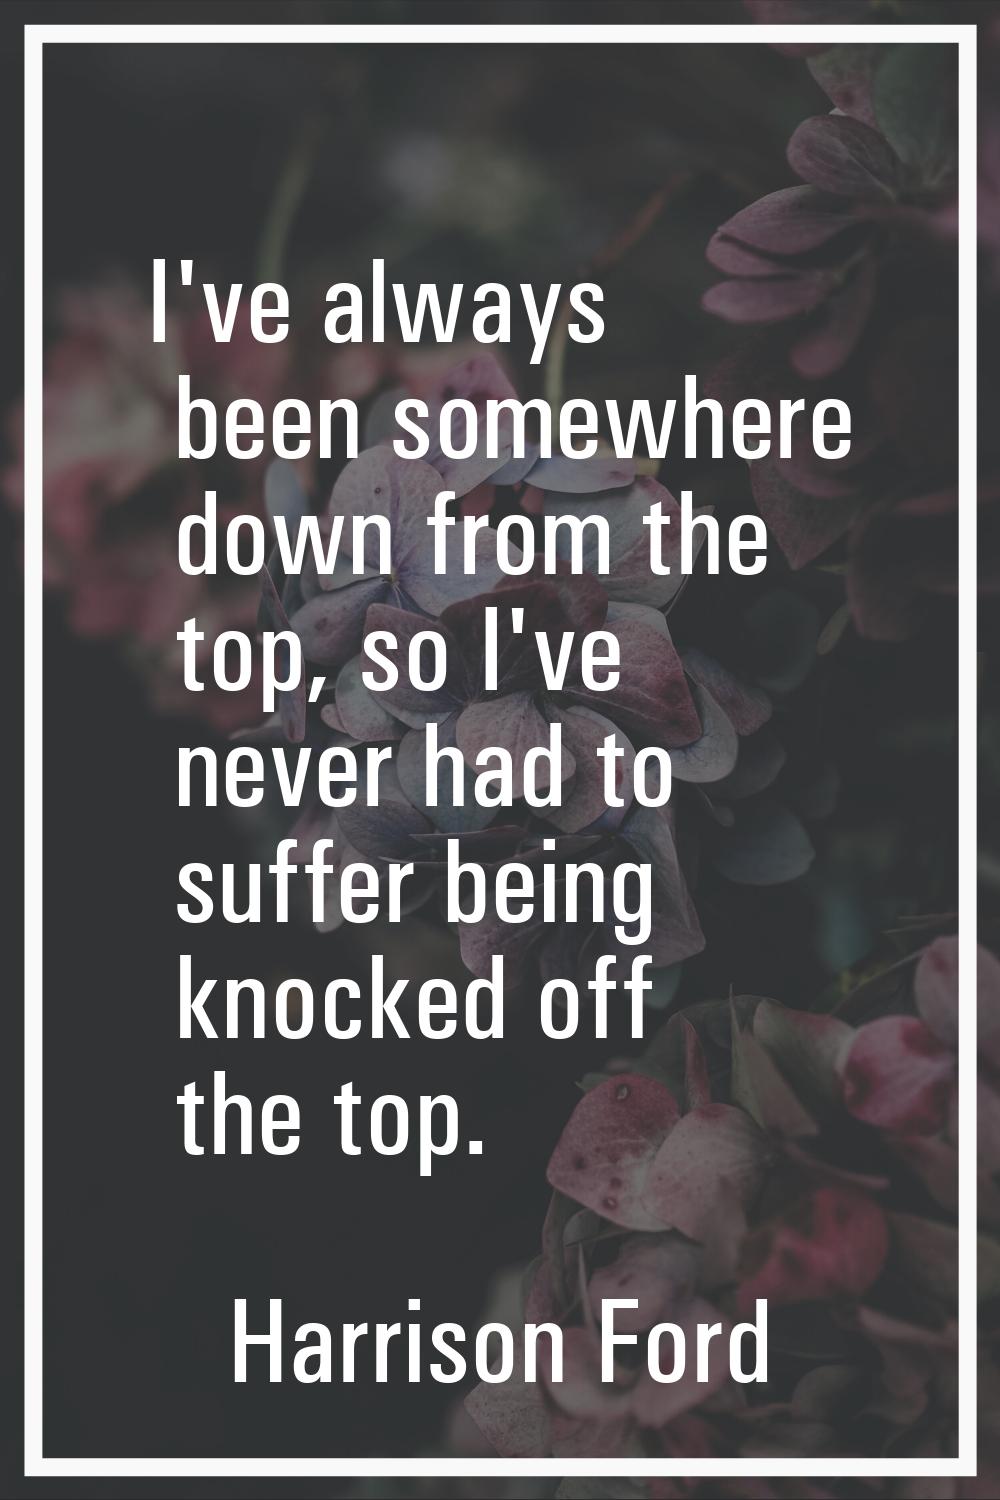 I've always been somewhere down from the top, so I've never had to suffer being knocked off the top